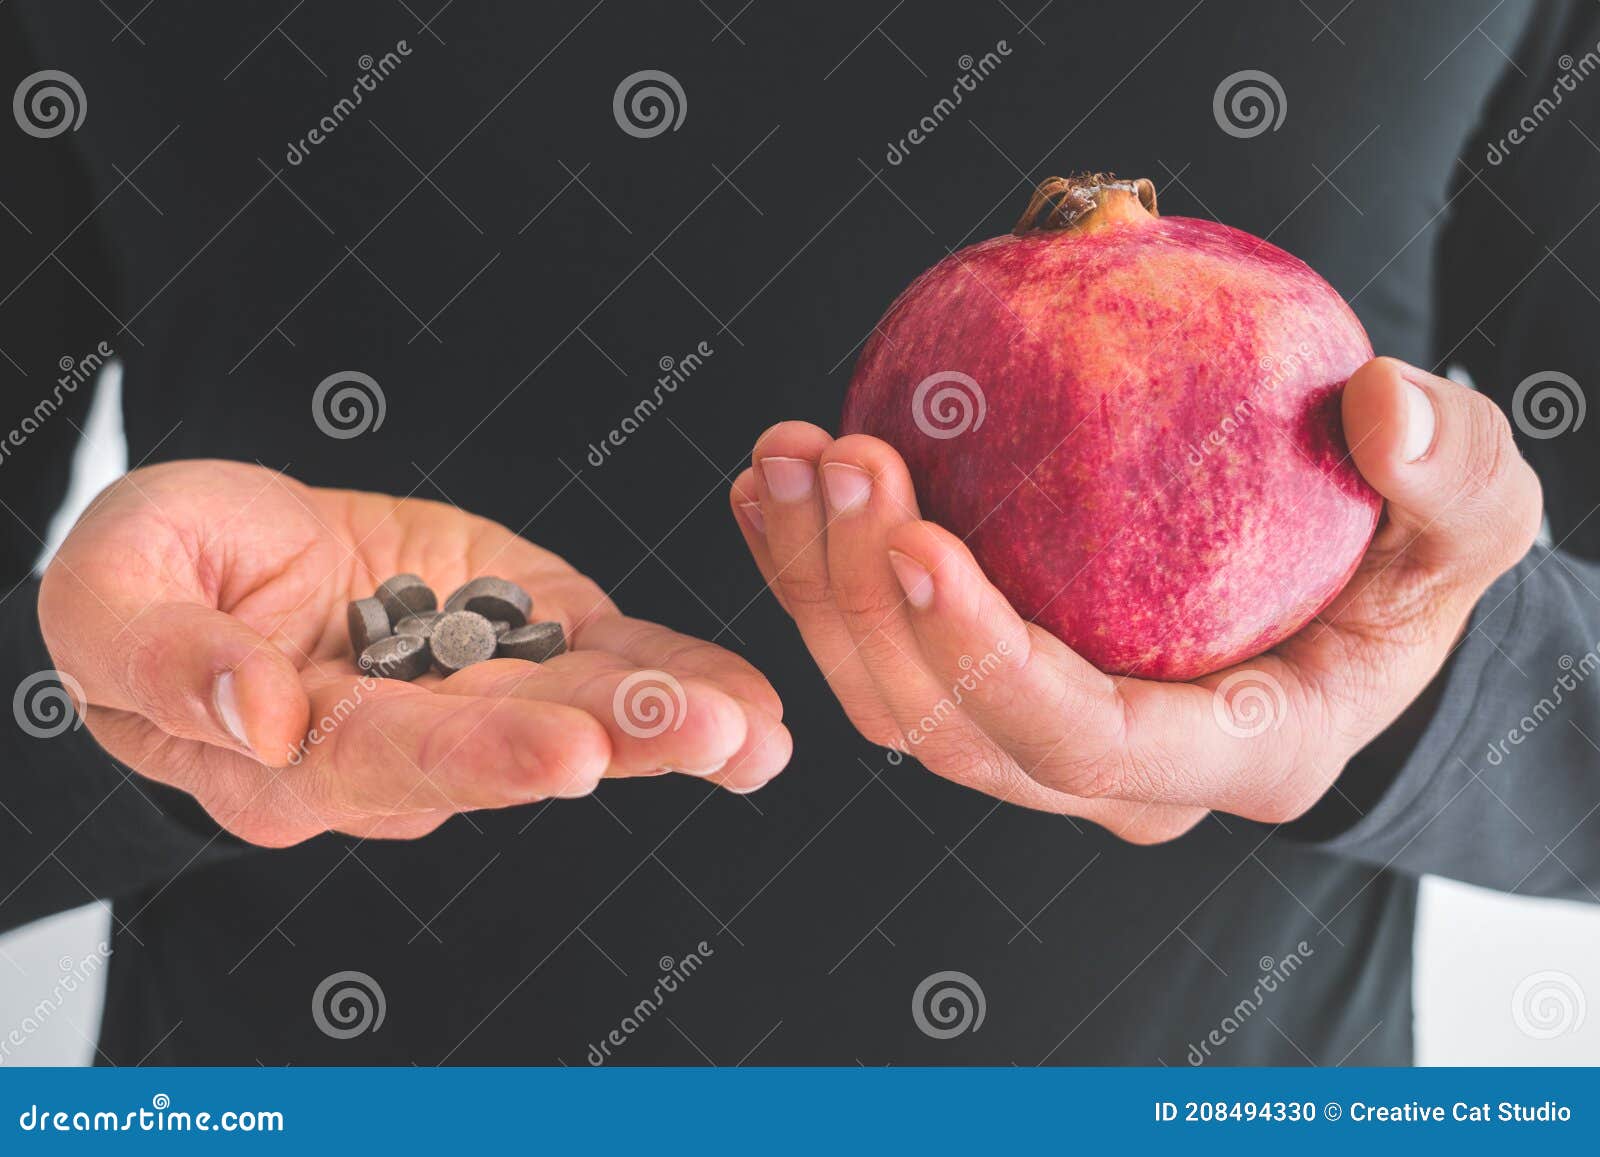 man hands with iron supplements and pomegranates to treat iron deficiency anemia